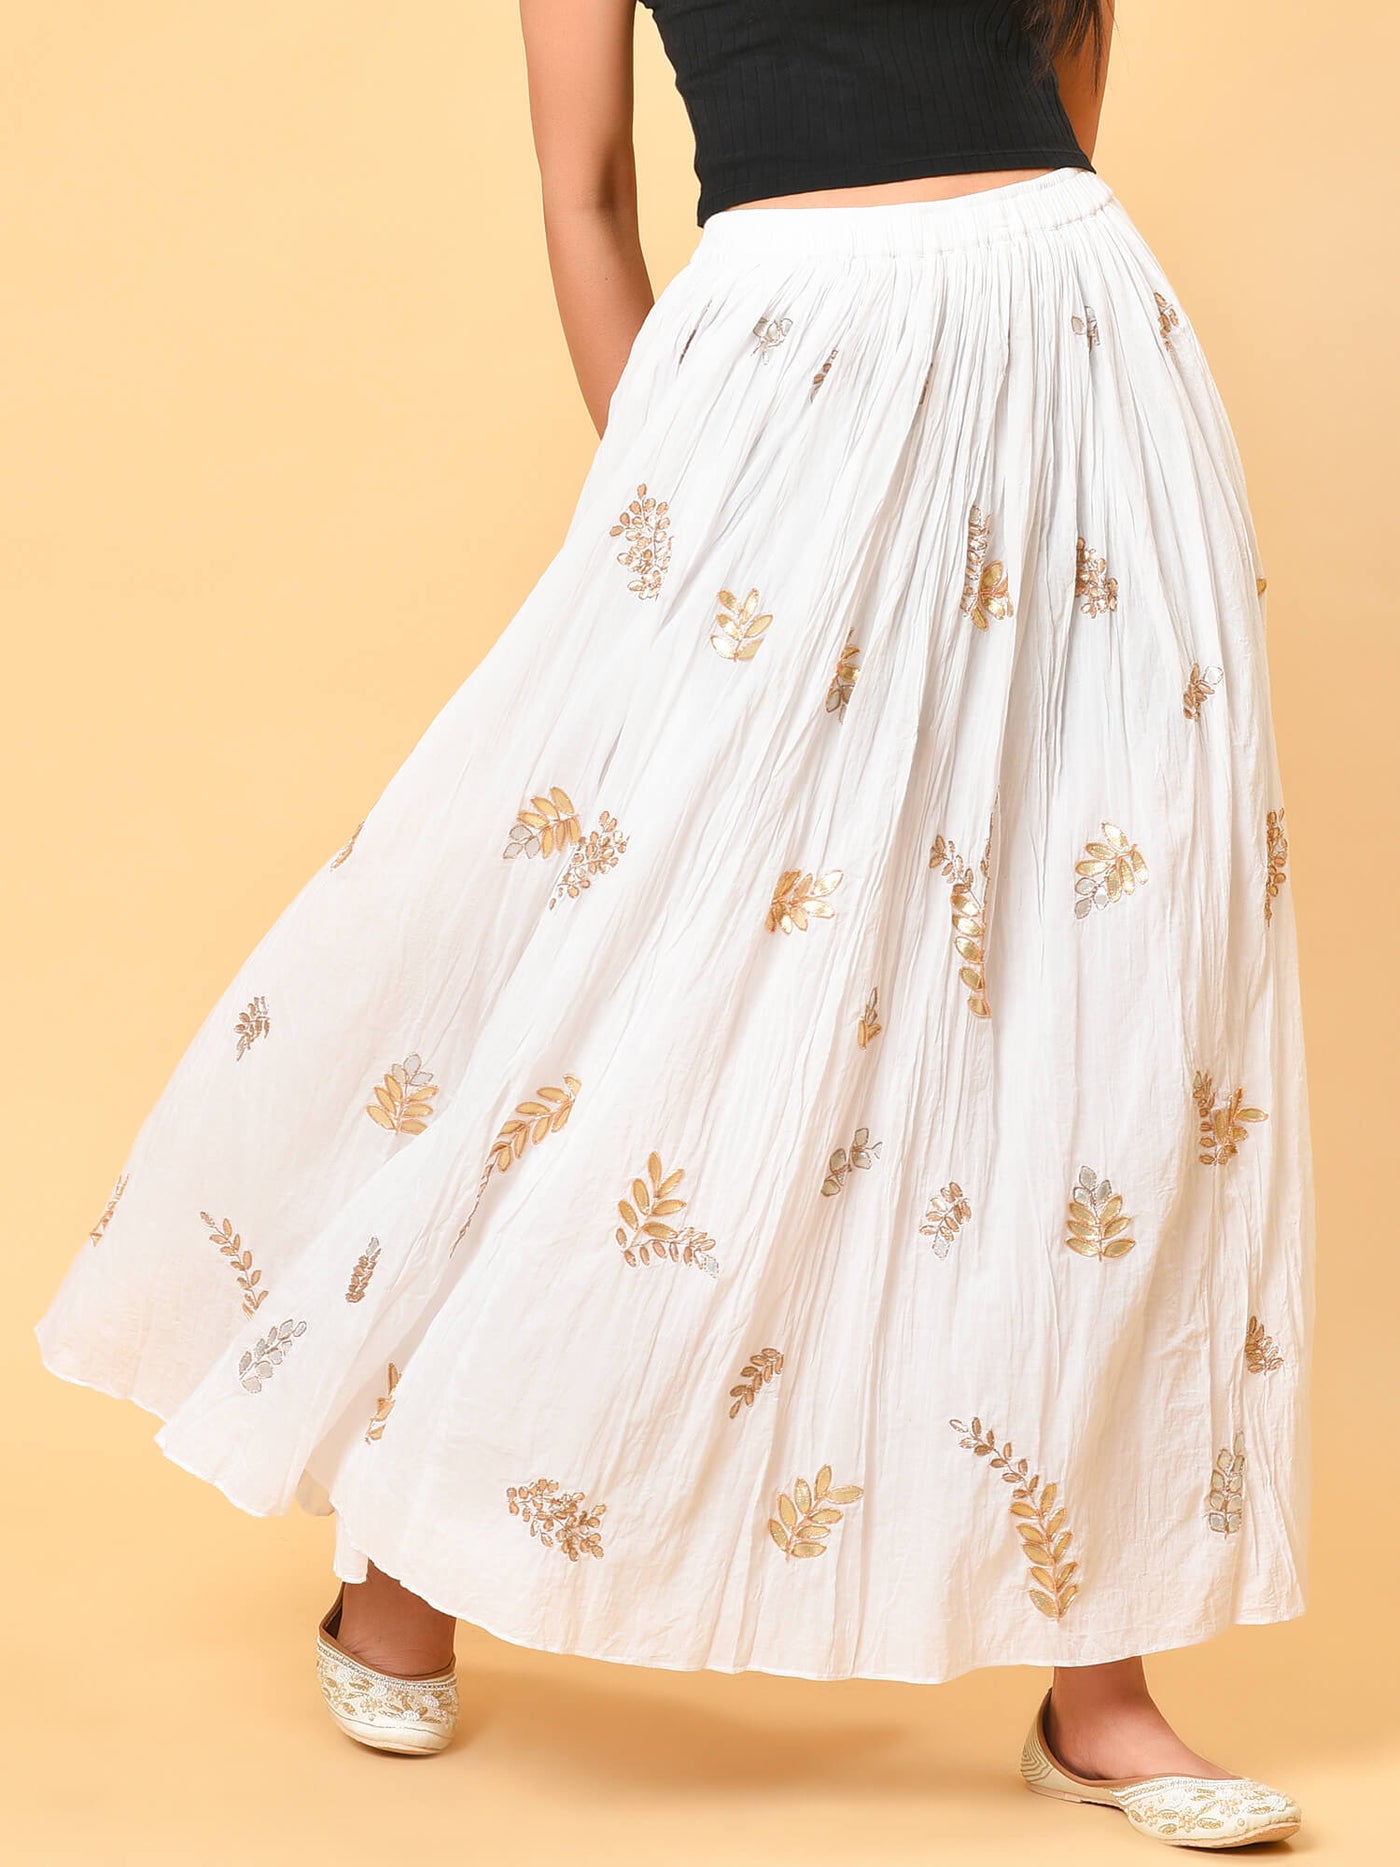 Champagne cotton crinkle skirt in white